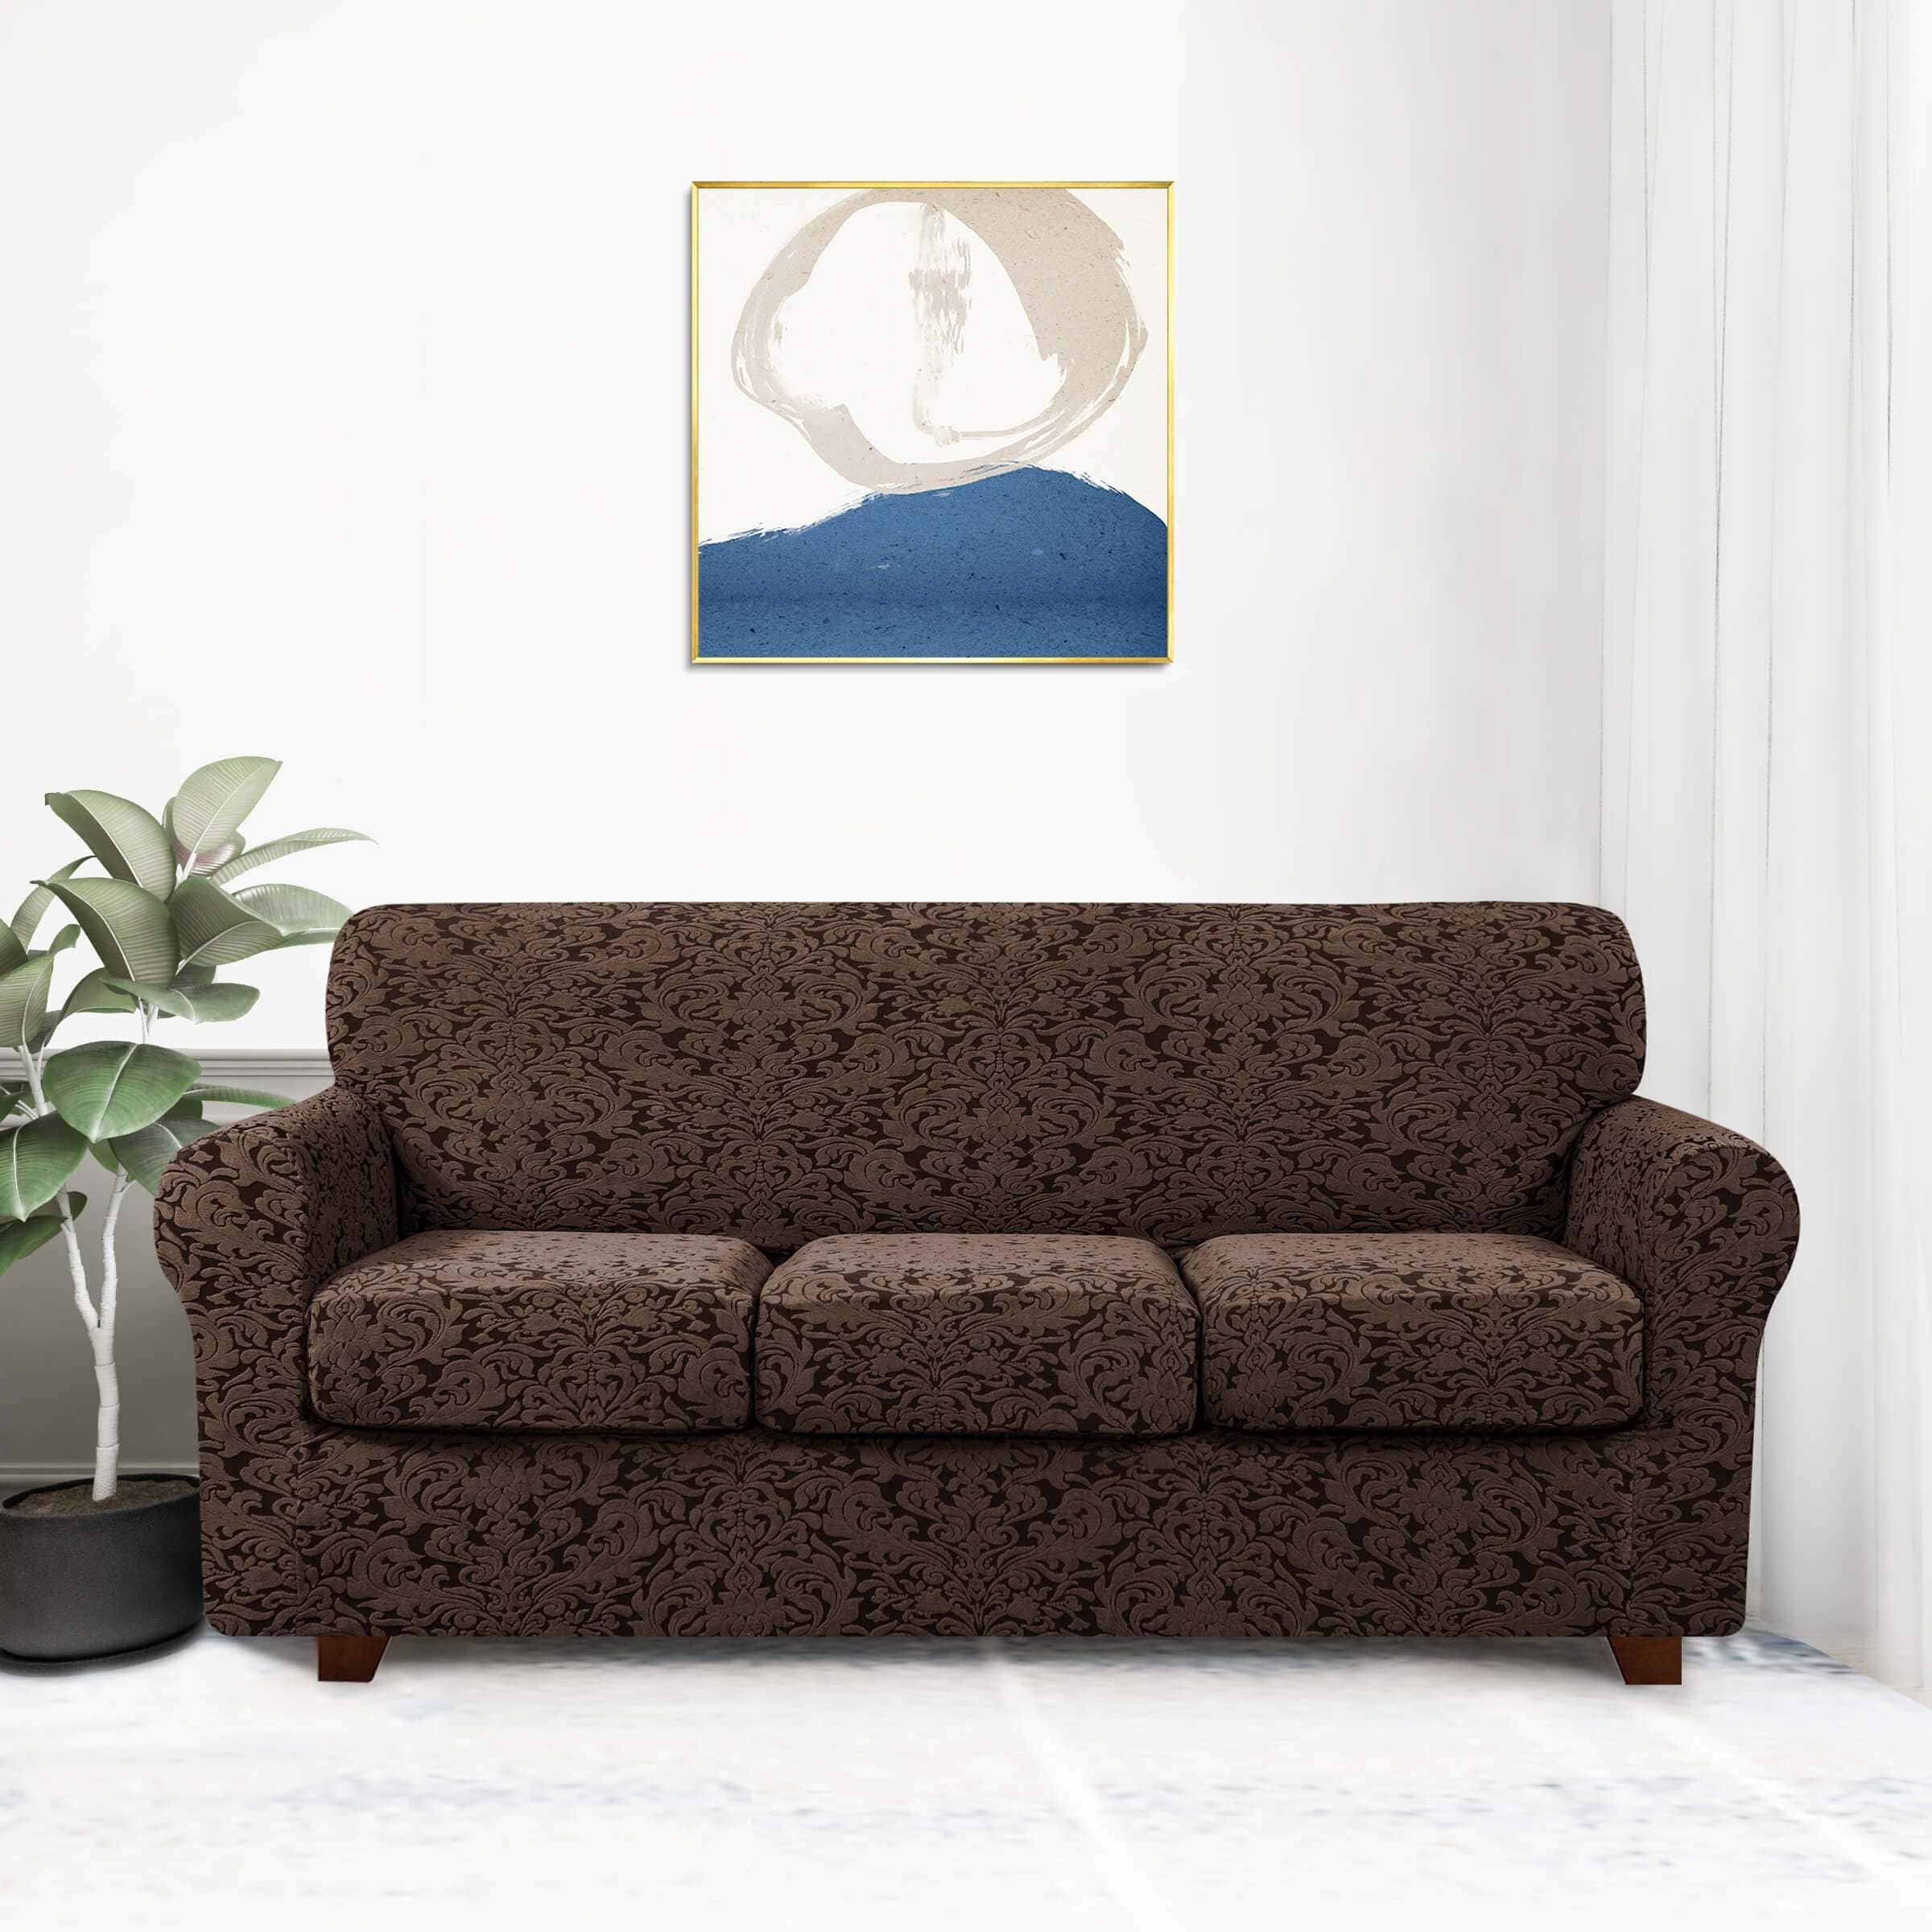 Loveseat, Burgundy Jacquard Sofa Cover for Loveseat 1 Piece Burgundy Couch Covers for Living Room Loveseat Slipcovers with Elastic Bottom Furniture Protector Cover for Leather Sofa and Couch